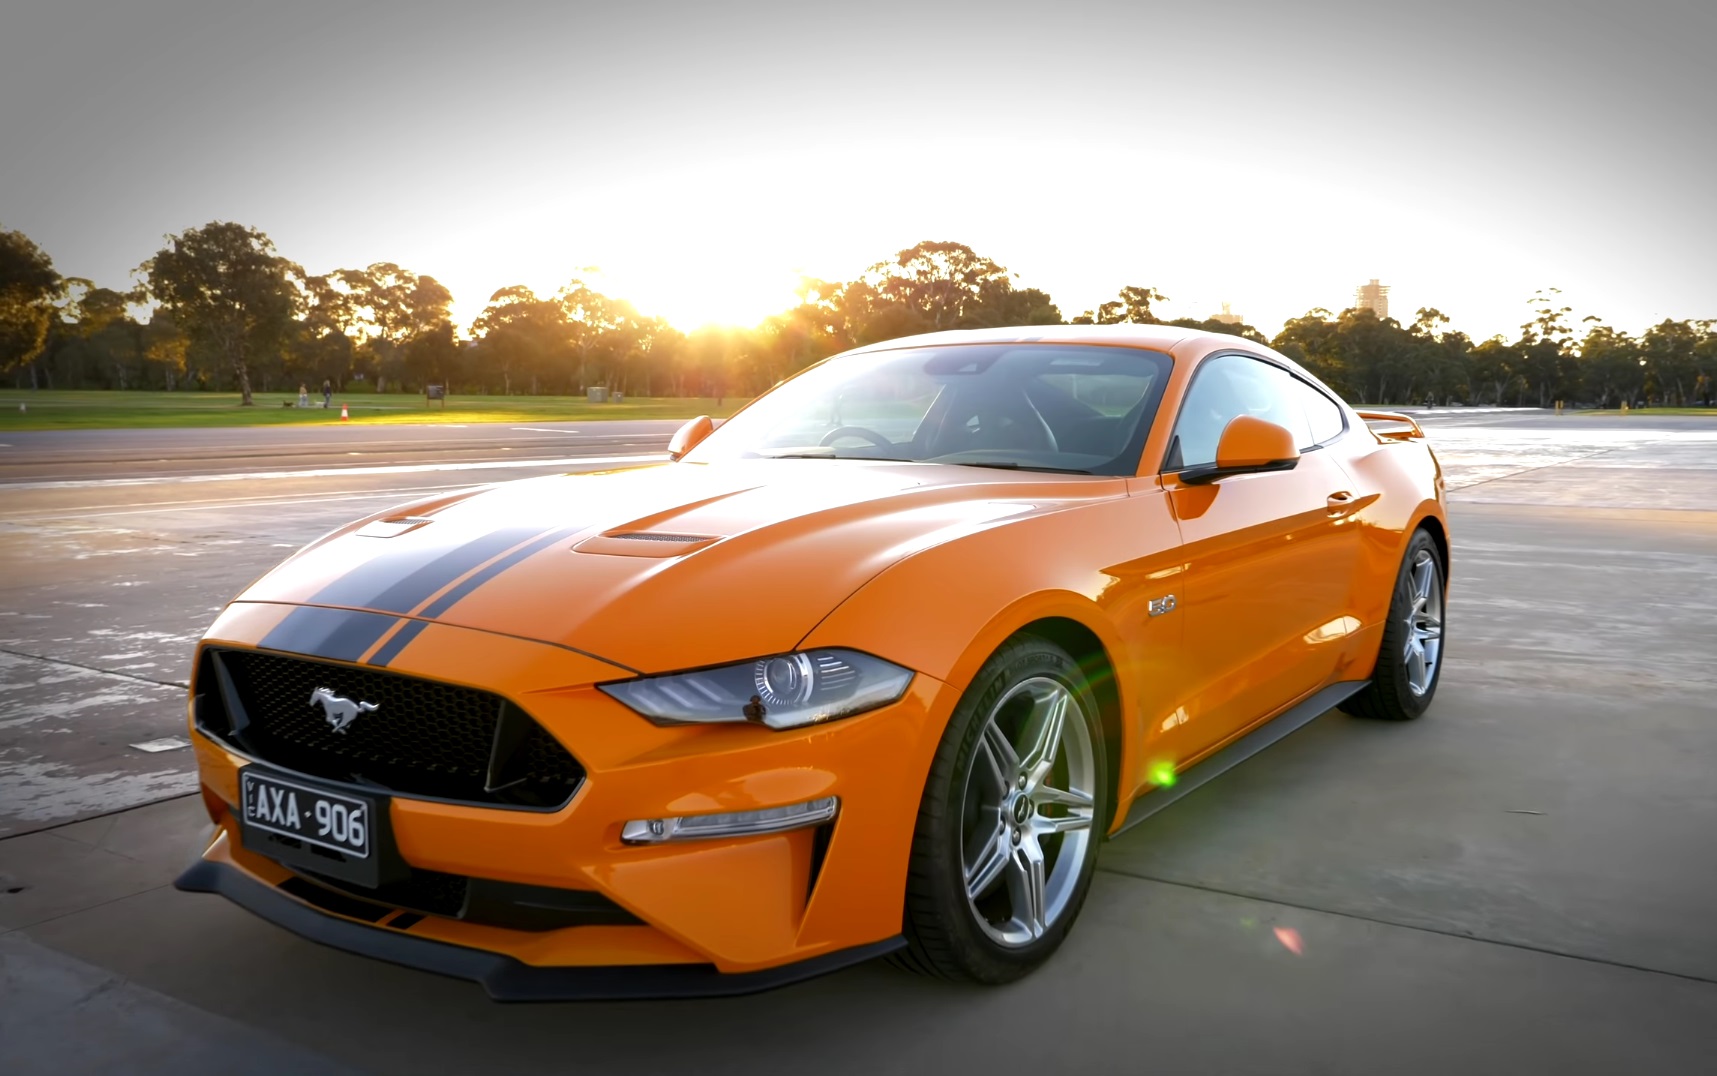 Video: 2019 Ford Mustang GT V8 In-Depth Review